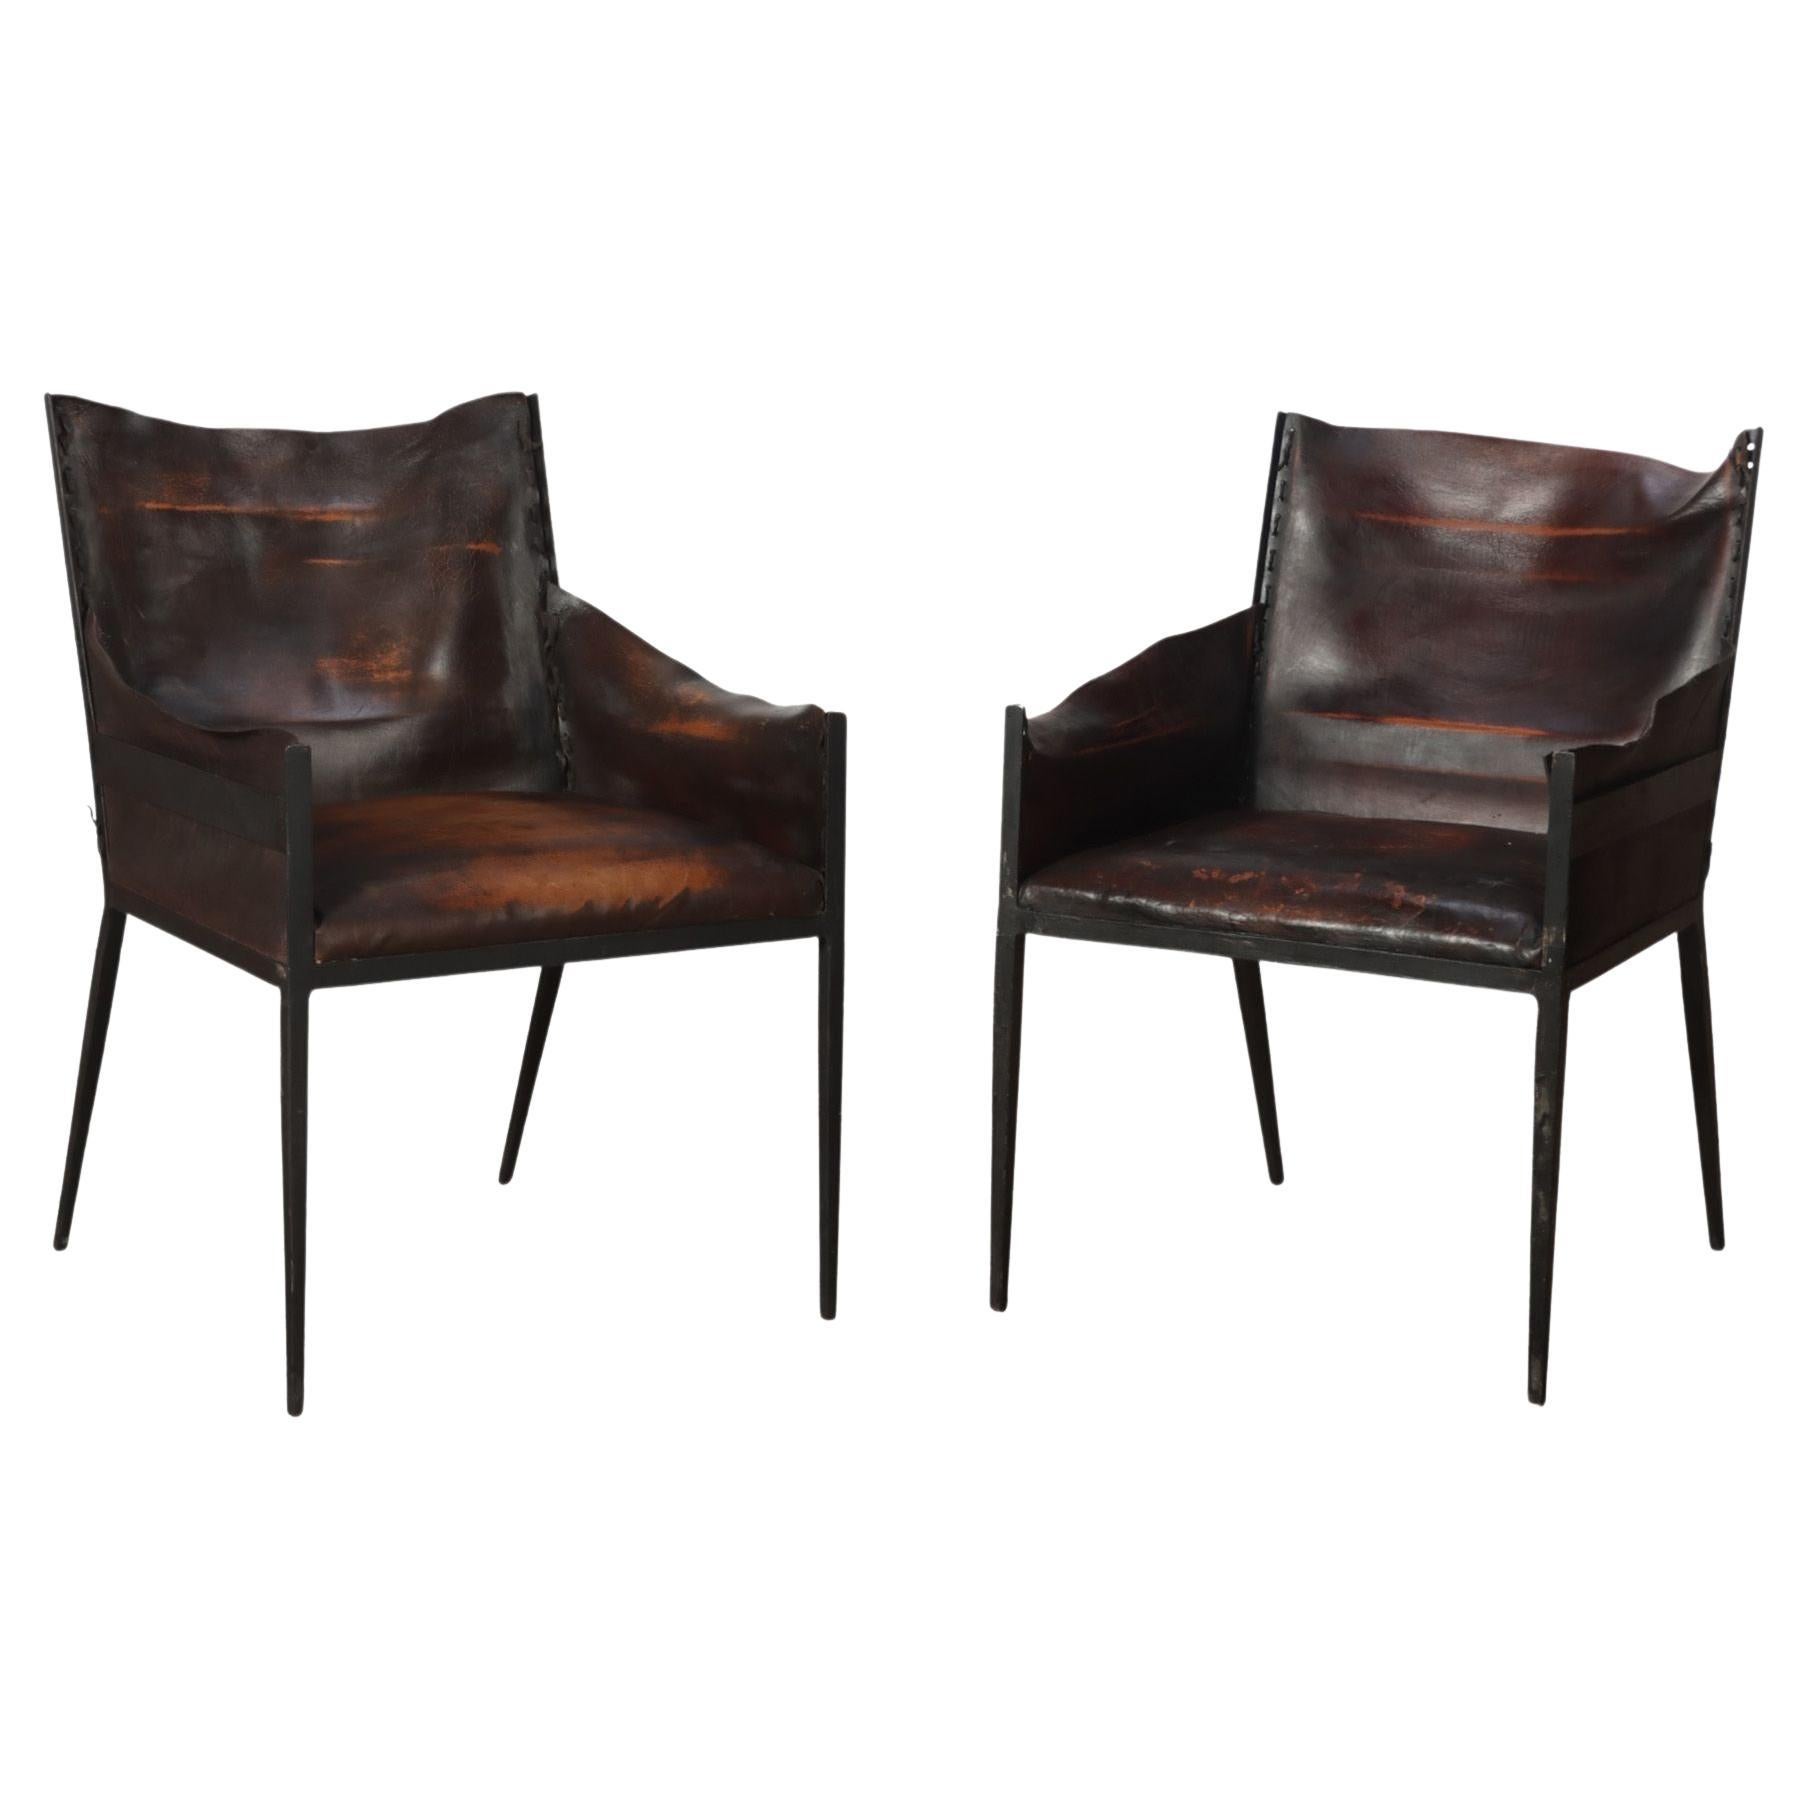 Pair of Vintage Iron and Leather Armchairs, Contemporary For Sale